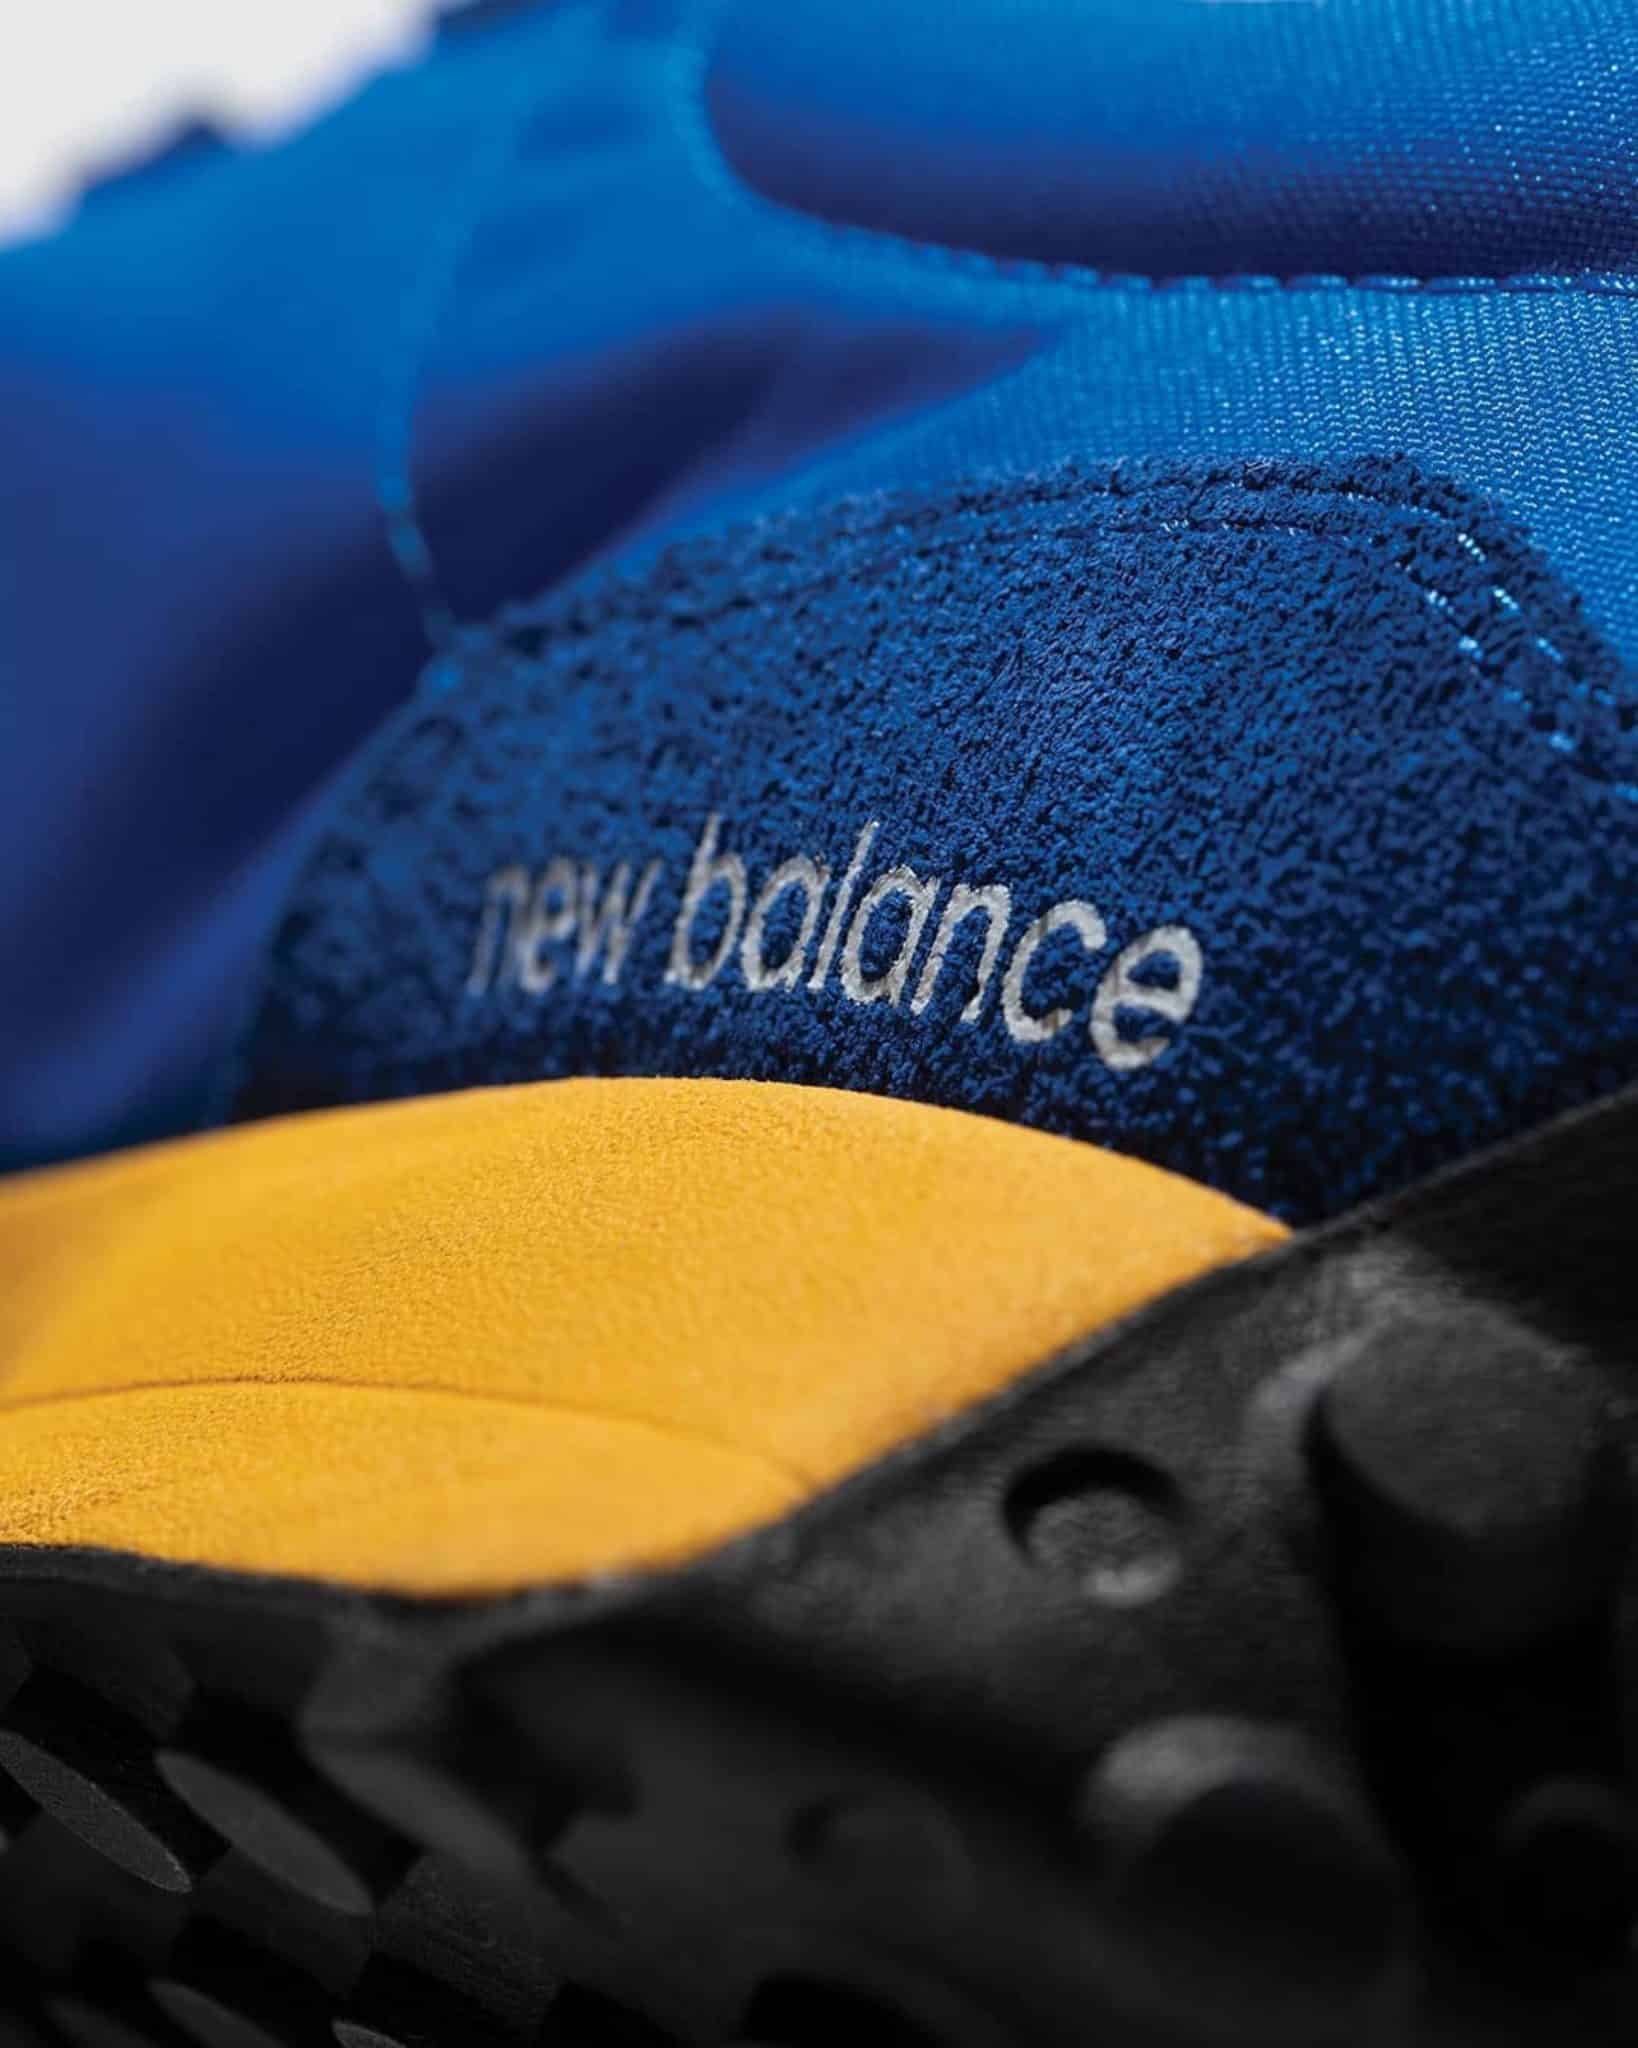 New Balance Release Dates